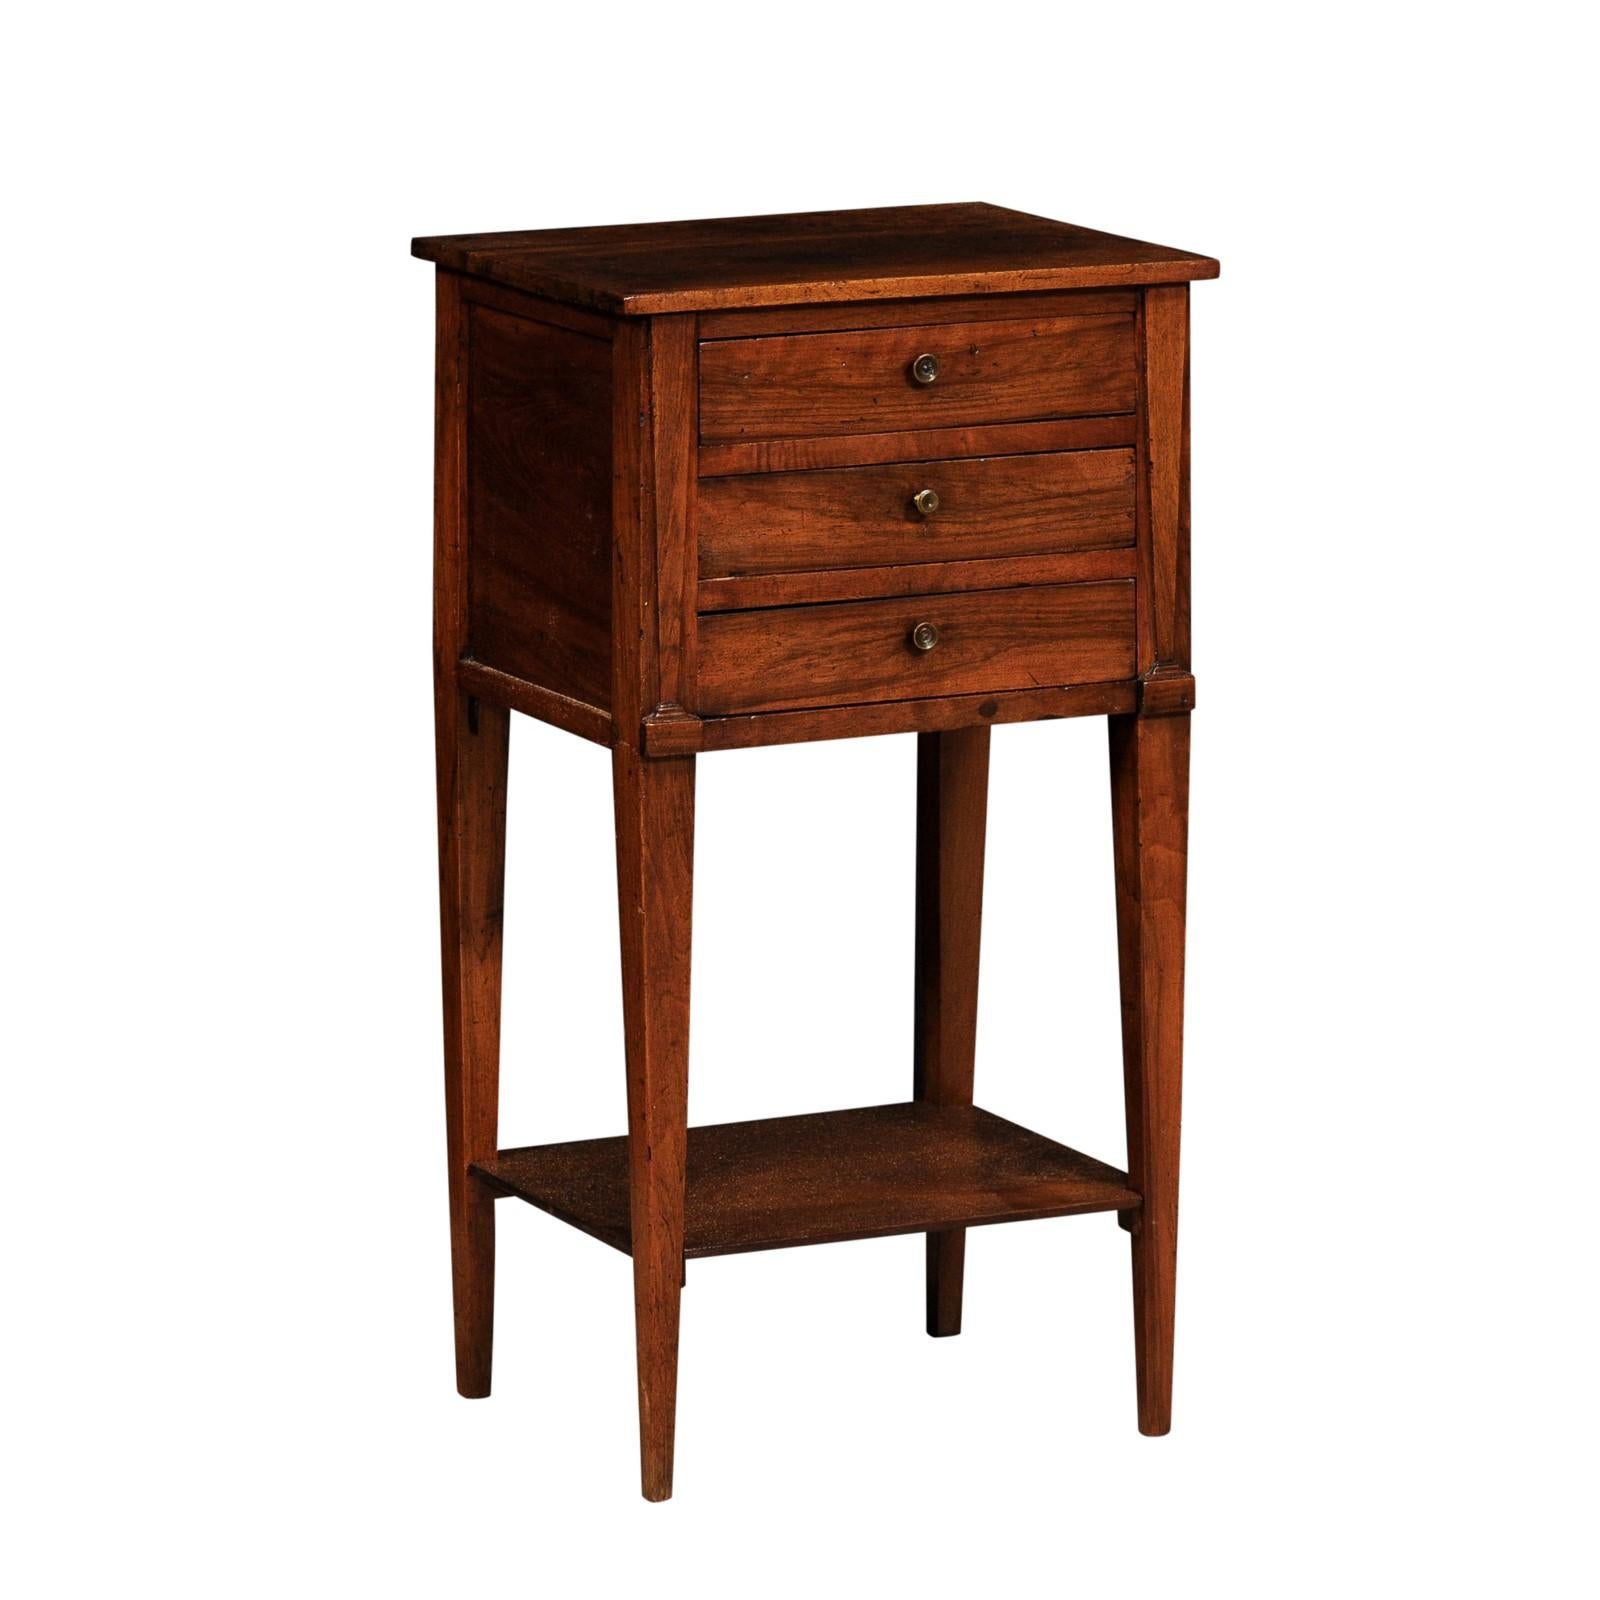 An Italian walnut bedside table from the 18th century with three drawers, lower shelf and tapering legs. Step back in time with this exquisite Italian walnut bedside table from the 18th century, a testament to the craftsmanship and artistry of the